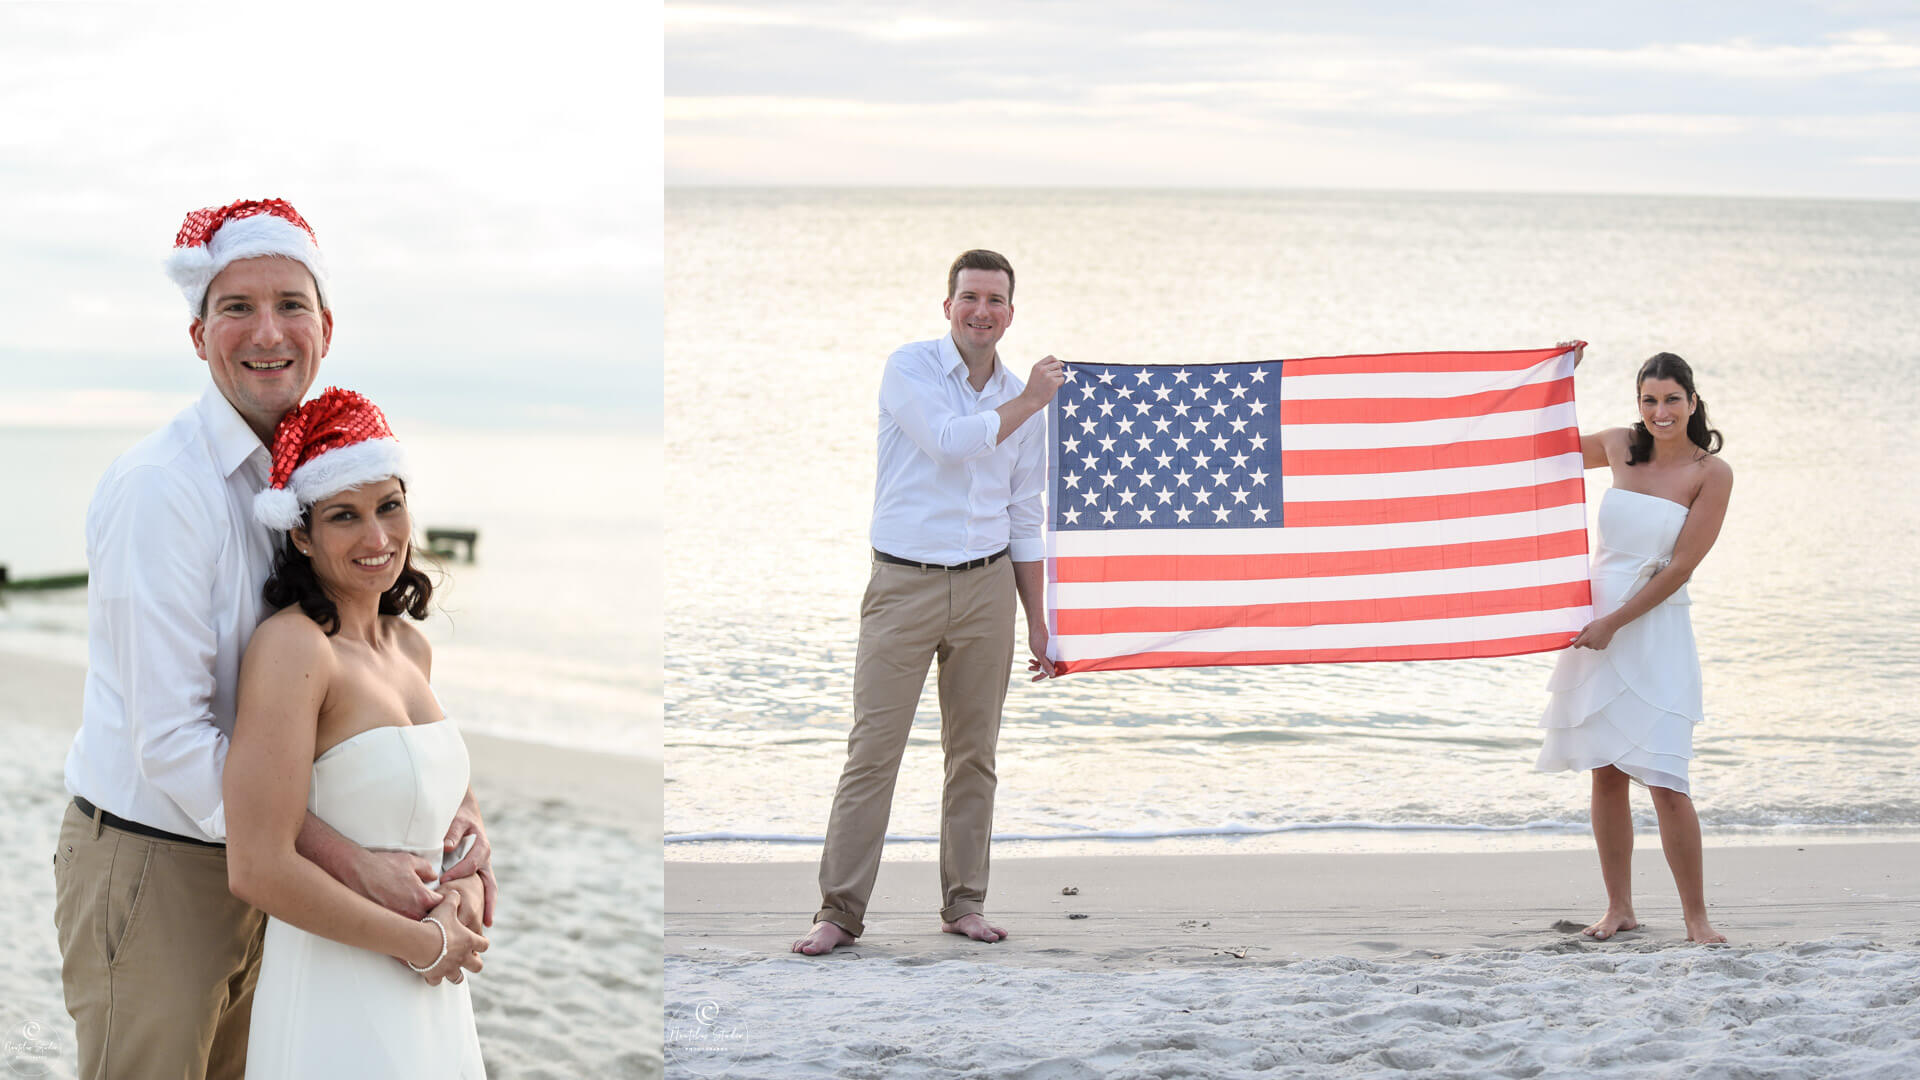 oto of bride and groom on beach wedding holding American Flag and wearing Santa hats.